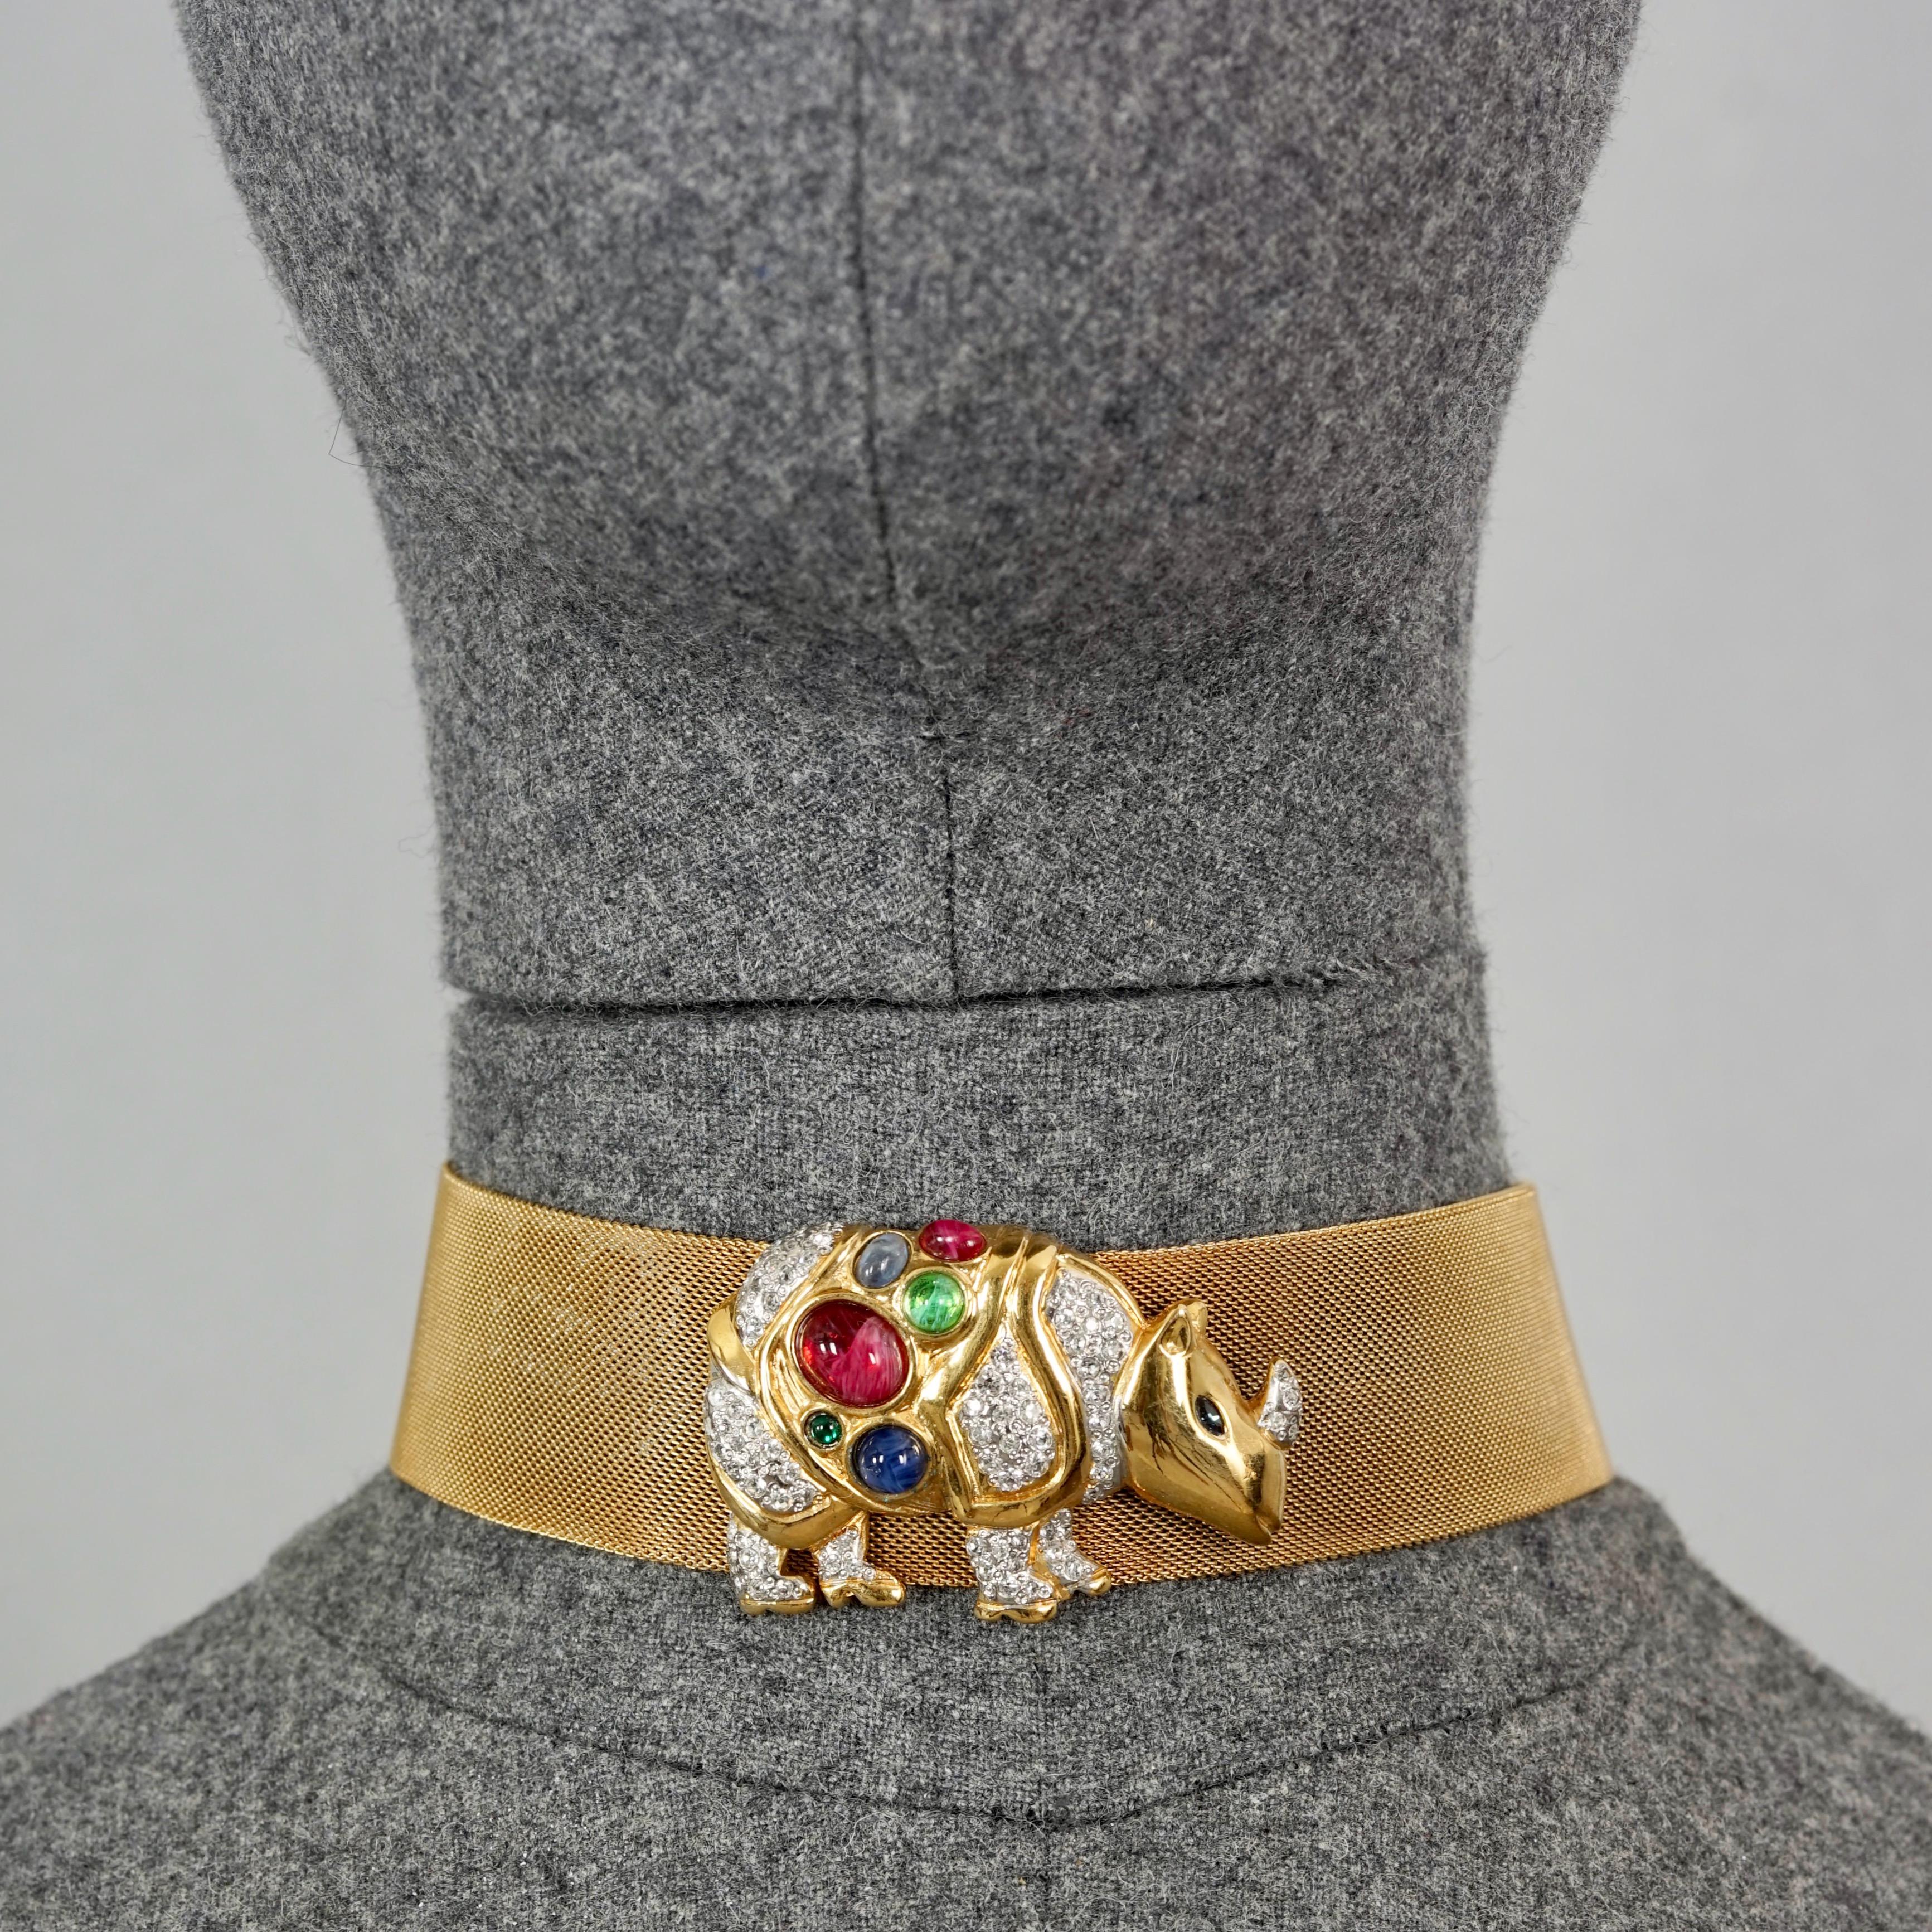 Vintage VALENTINO GARAVANI Jewelled Rhino Gilt Mesh Choker Necklace

Measurements:
Height: 1.42 inches (3.6 cm)
Wearable Length: 13.77 inches until 15.15 inches (35 cm until 38.5 cm)

Features:
- 100% Authentic CHRISTIAN LACROIX.
- Mesh choker with